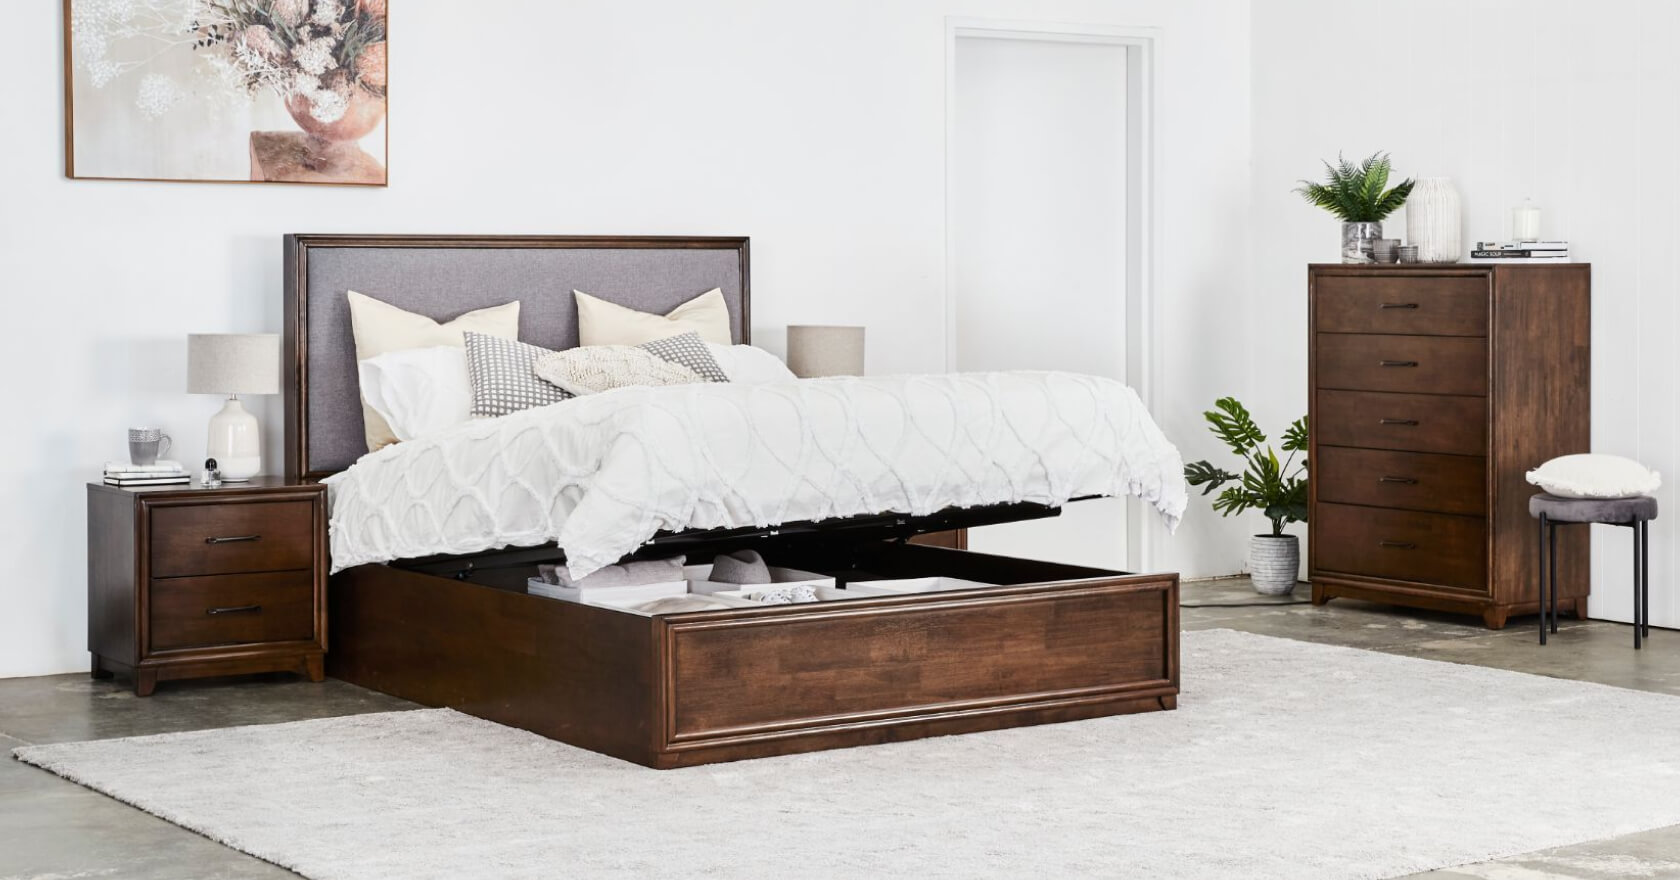 A stylish and practical Madison timber storage bed